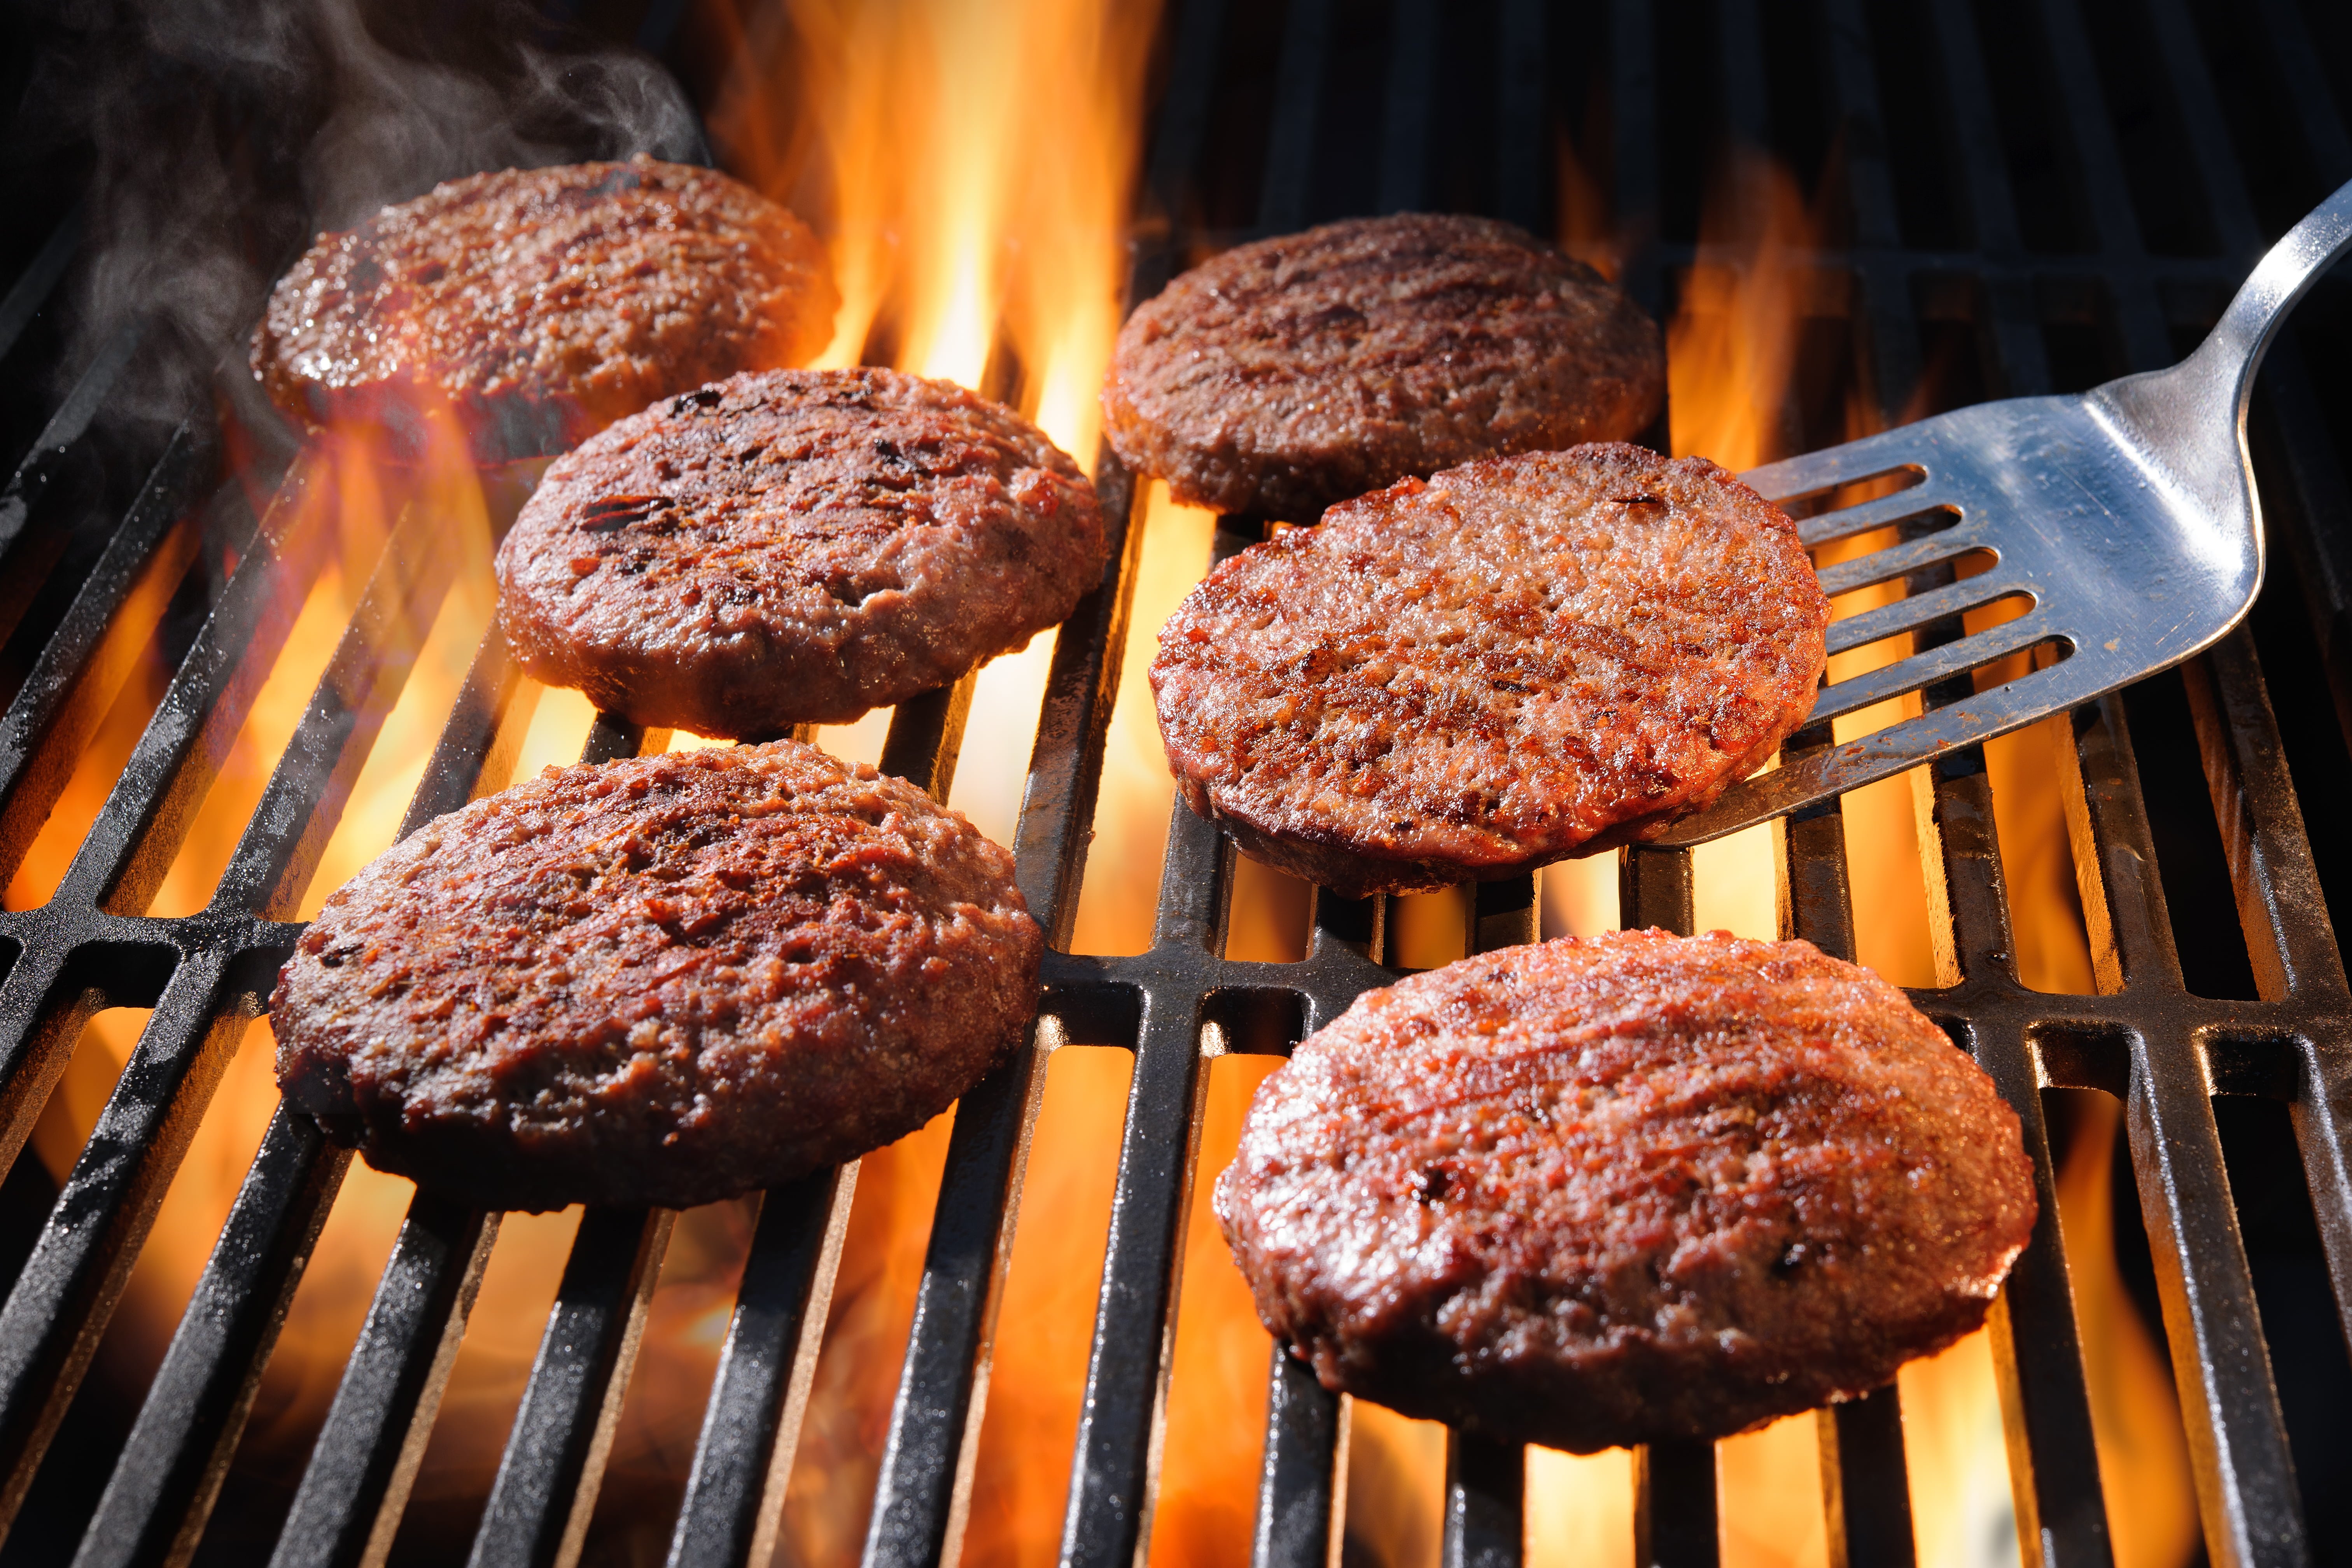 Beef hamburger patties sizzling on the barbecue - AskDrManny